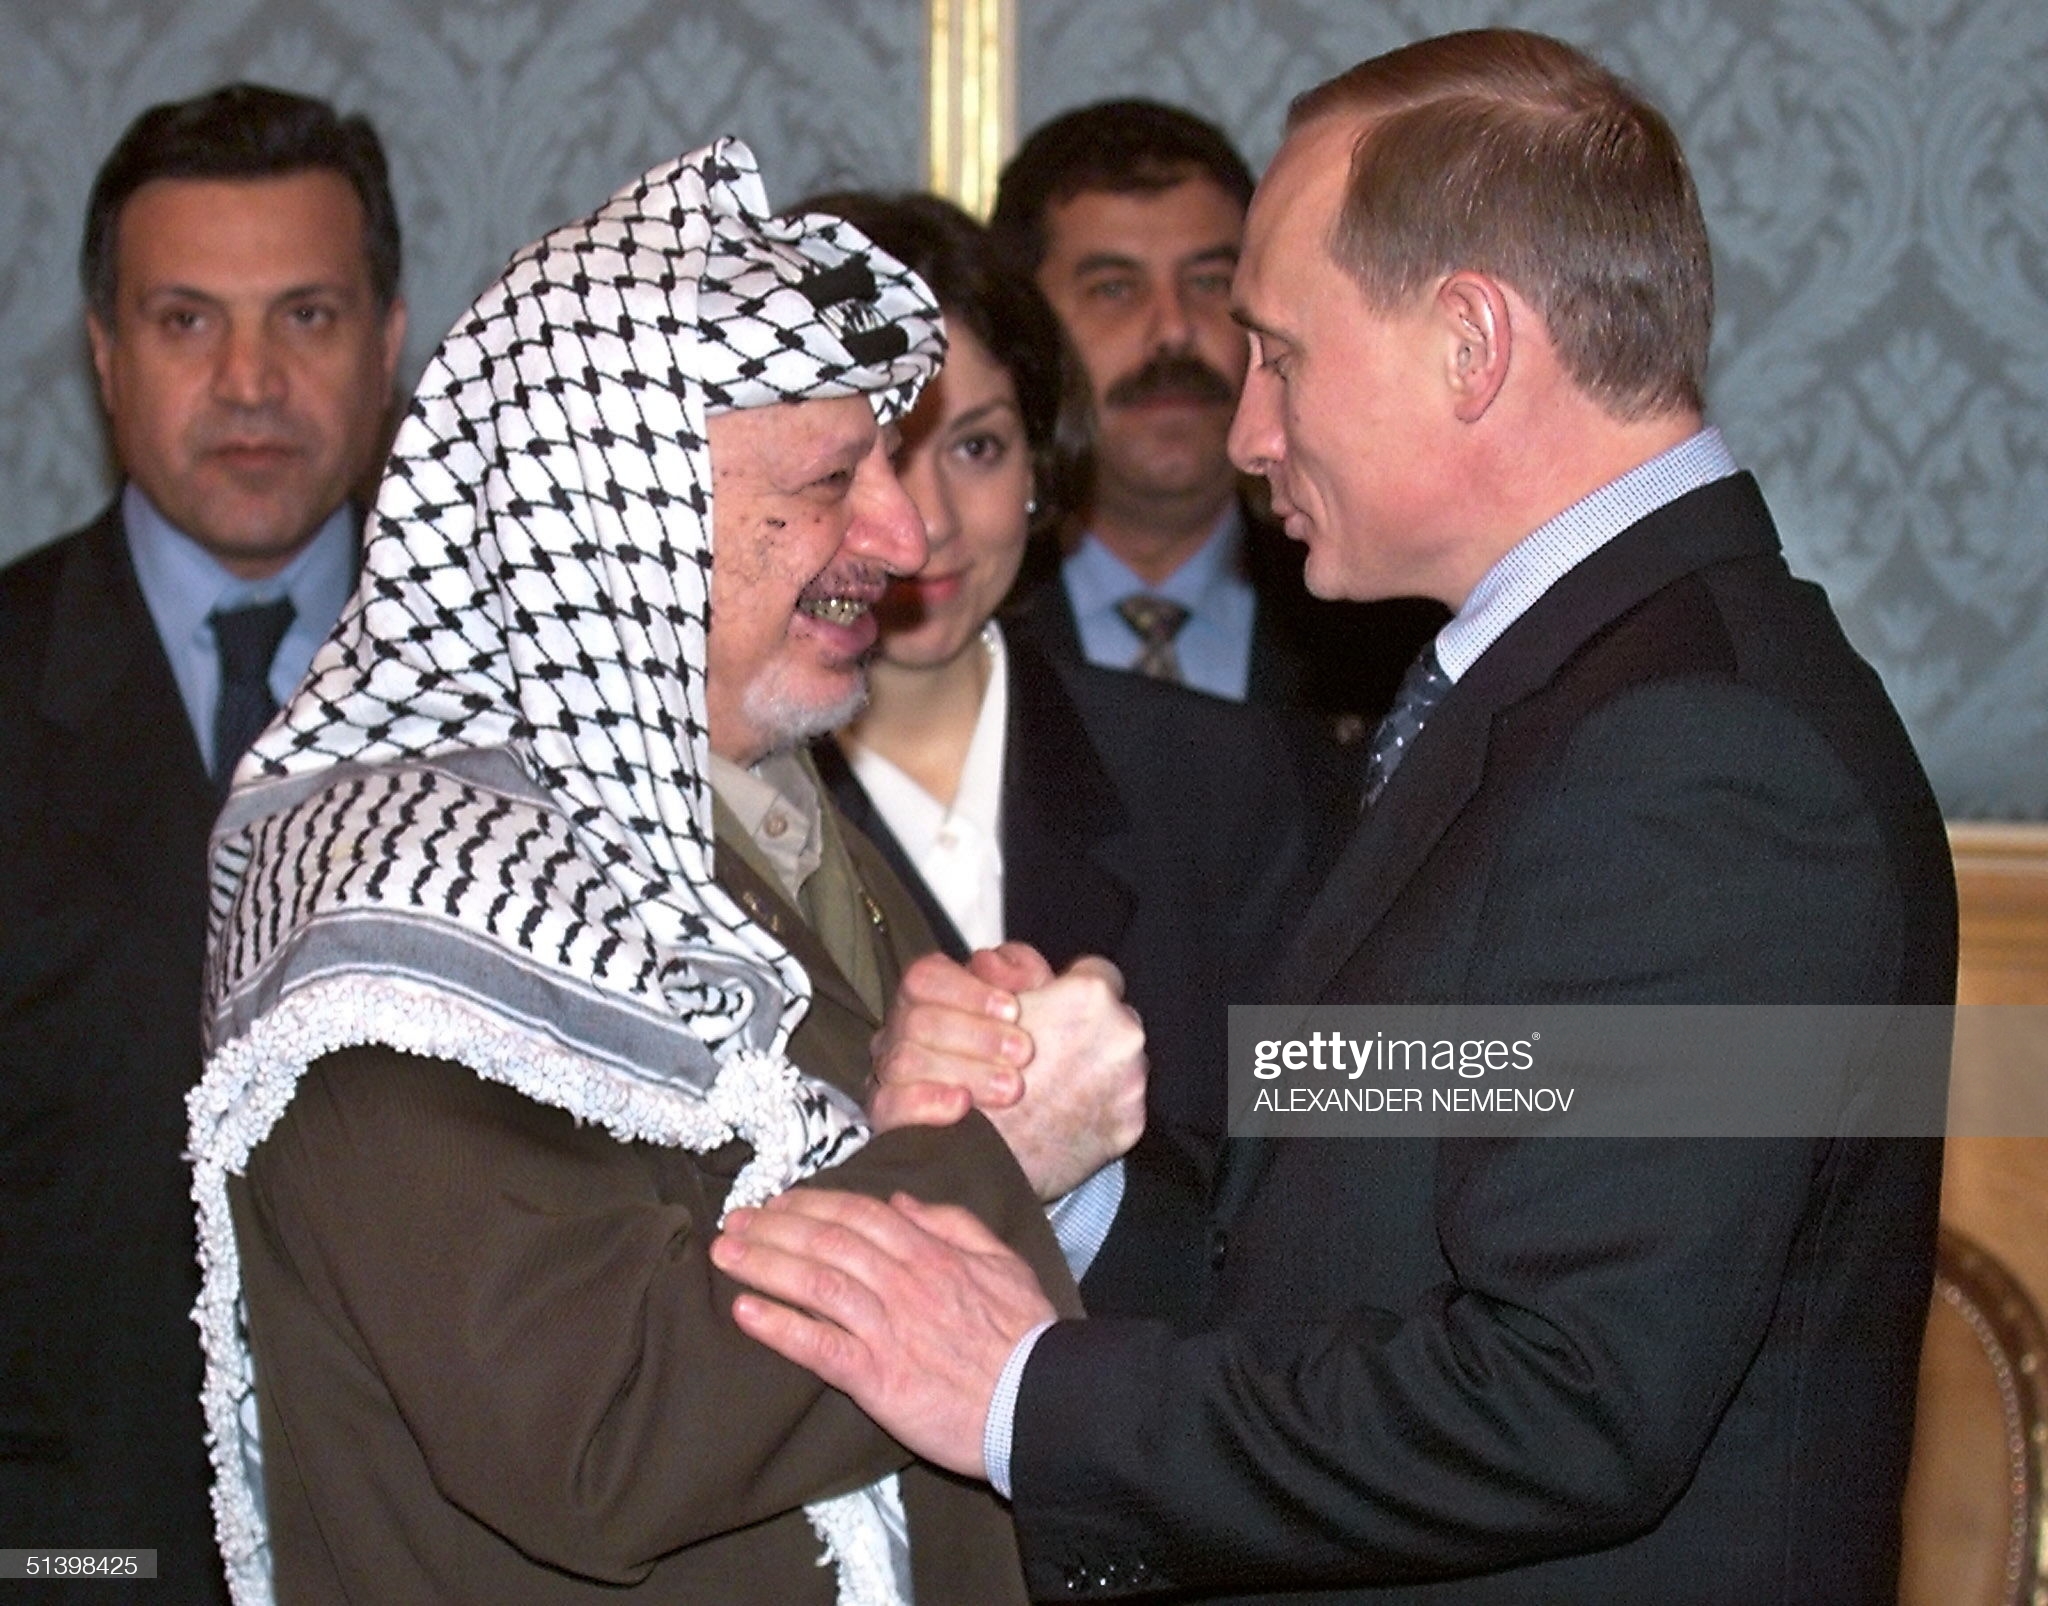 russian-prime-minister-vladimir-putin-greets-palestinian-leader-29-picture-id51398425